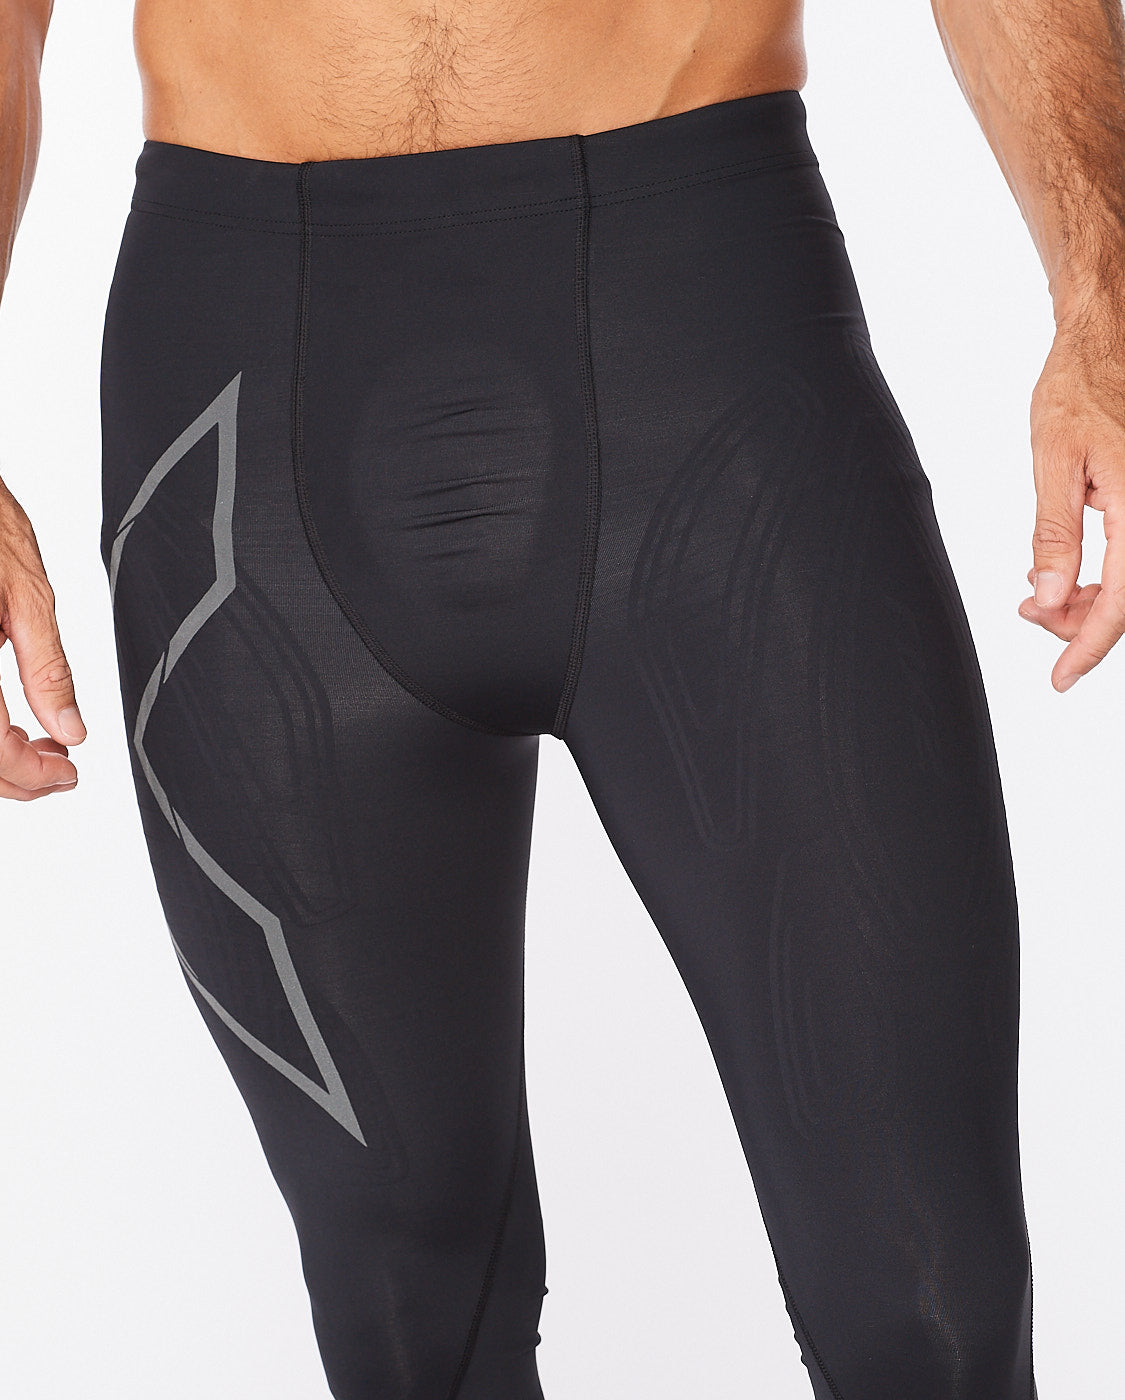 2XU Men's Accelerate Compression Tights with Storage Black - Toby's Sports